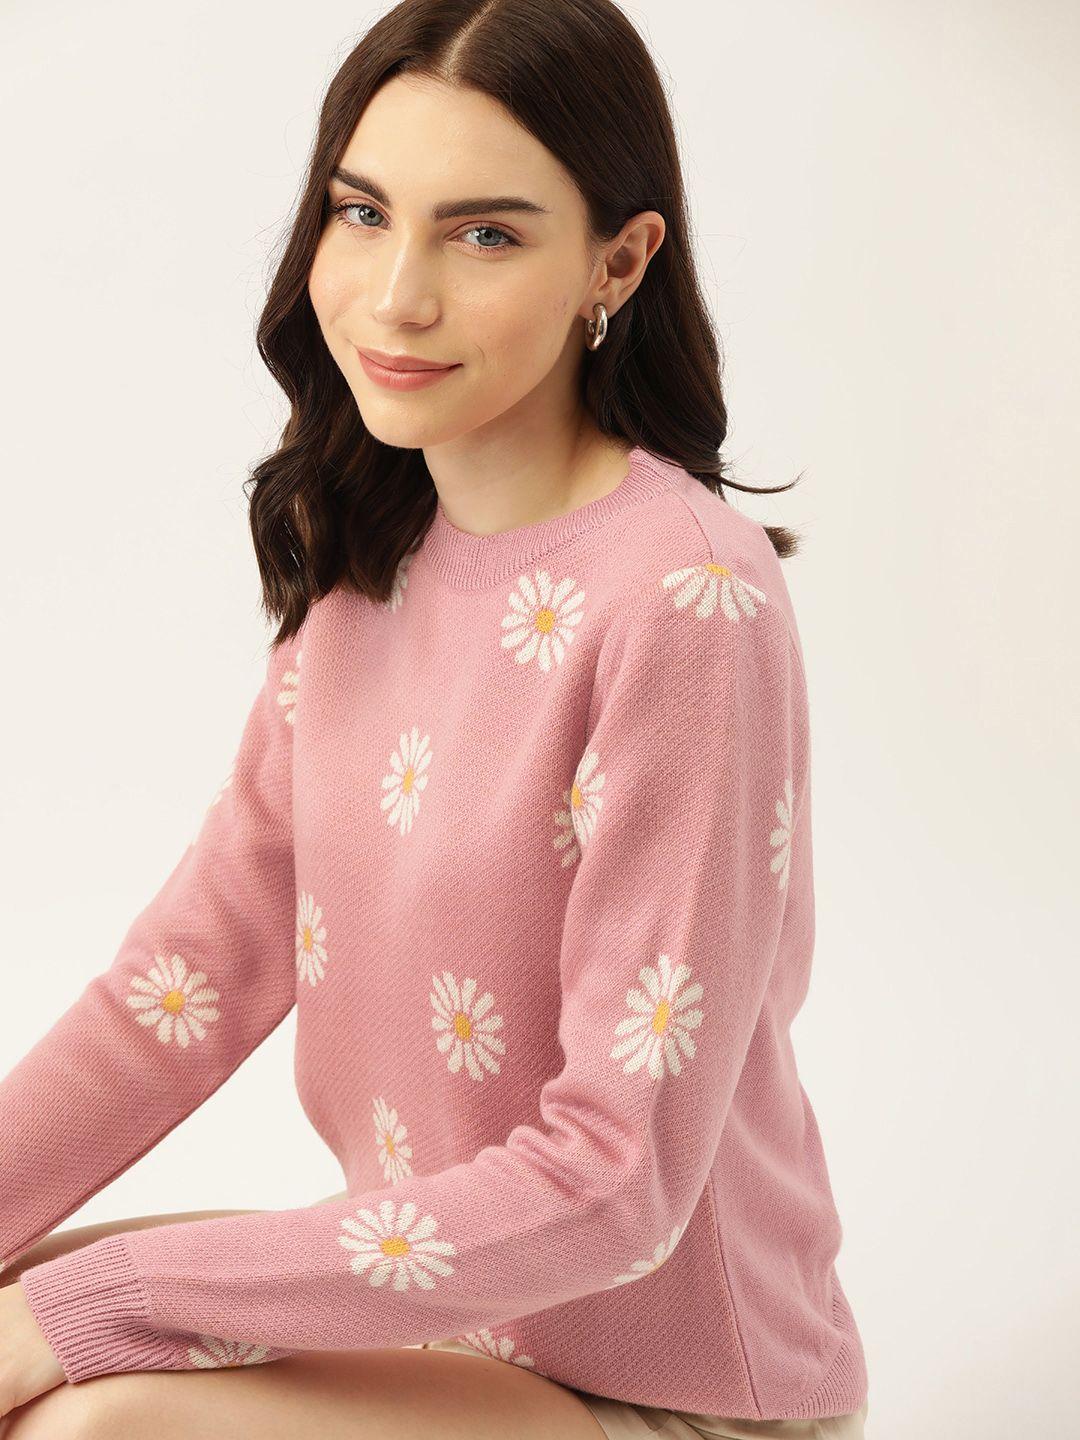 dressberry acrylic floral pattern pullover